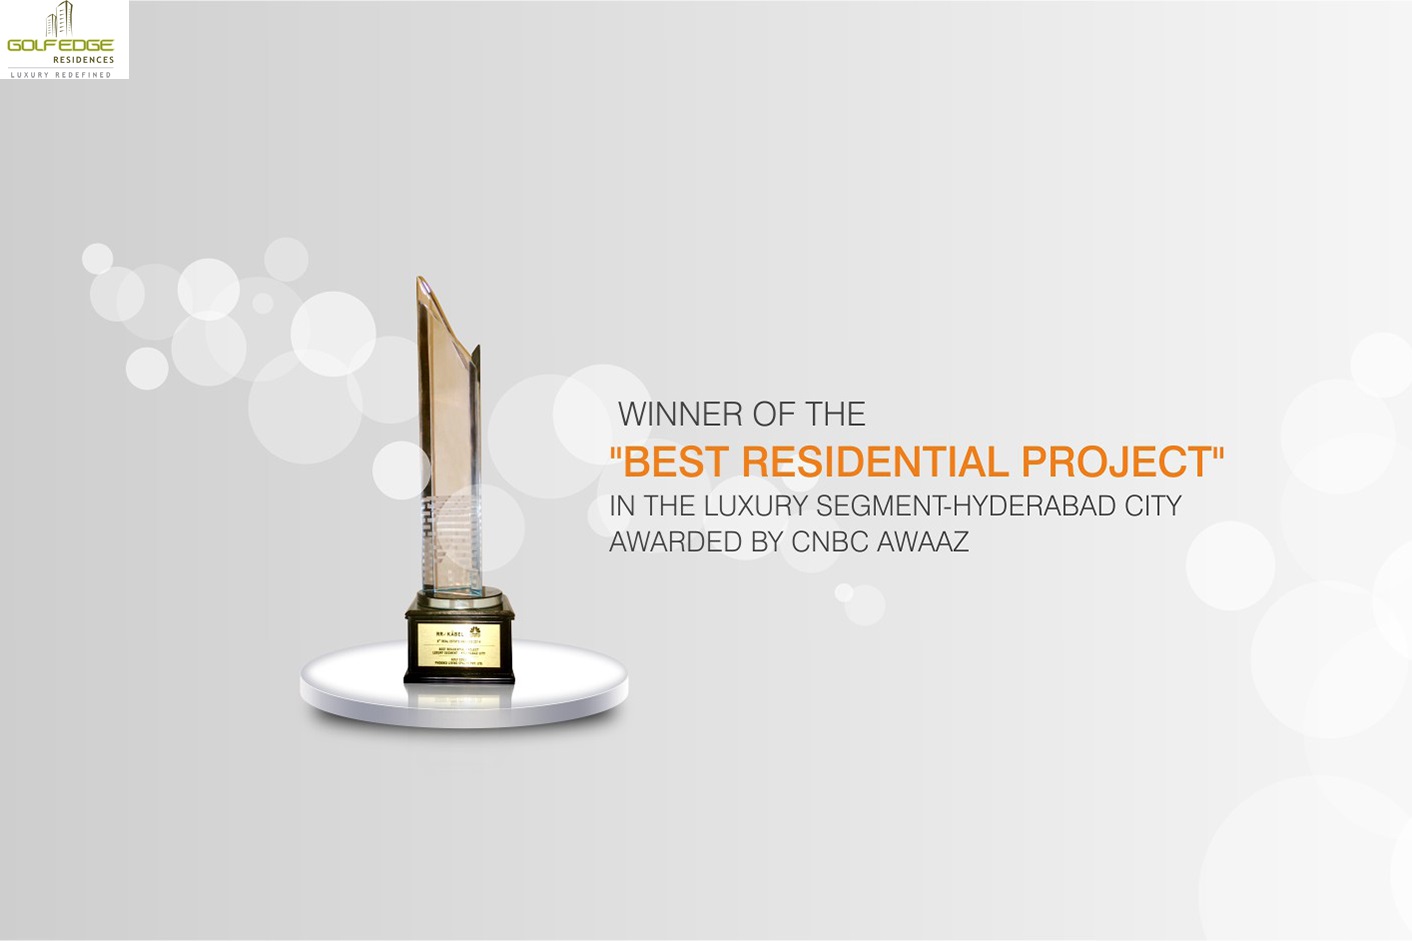 Phoenix Golf Edge is winner of the best residential project in the luxury segment - Hyderabad city, awarded by CNBZ AWAAZ Update